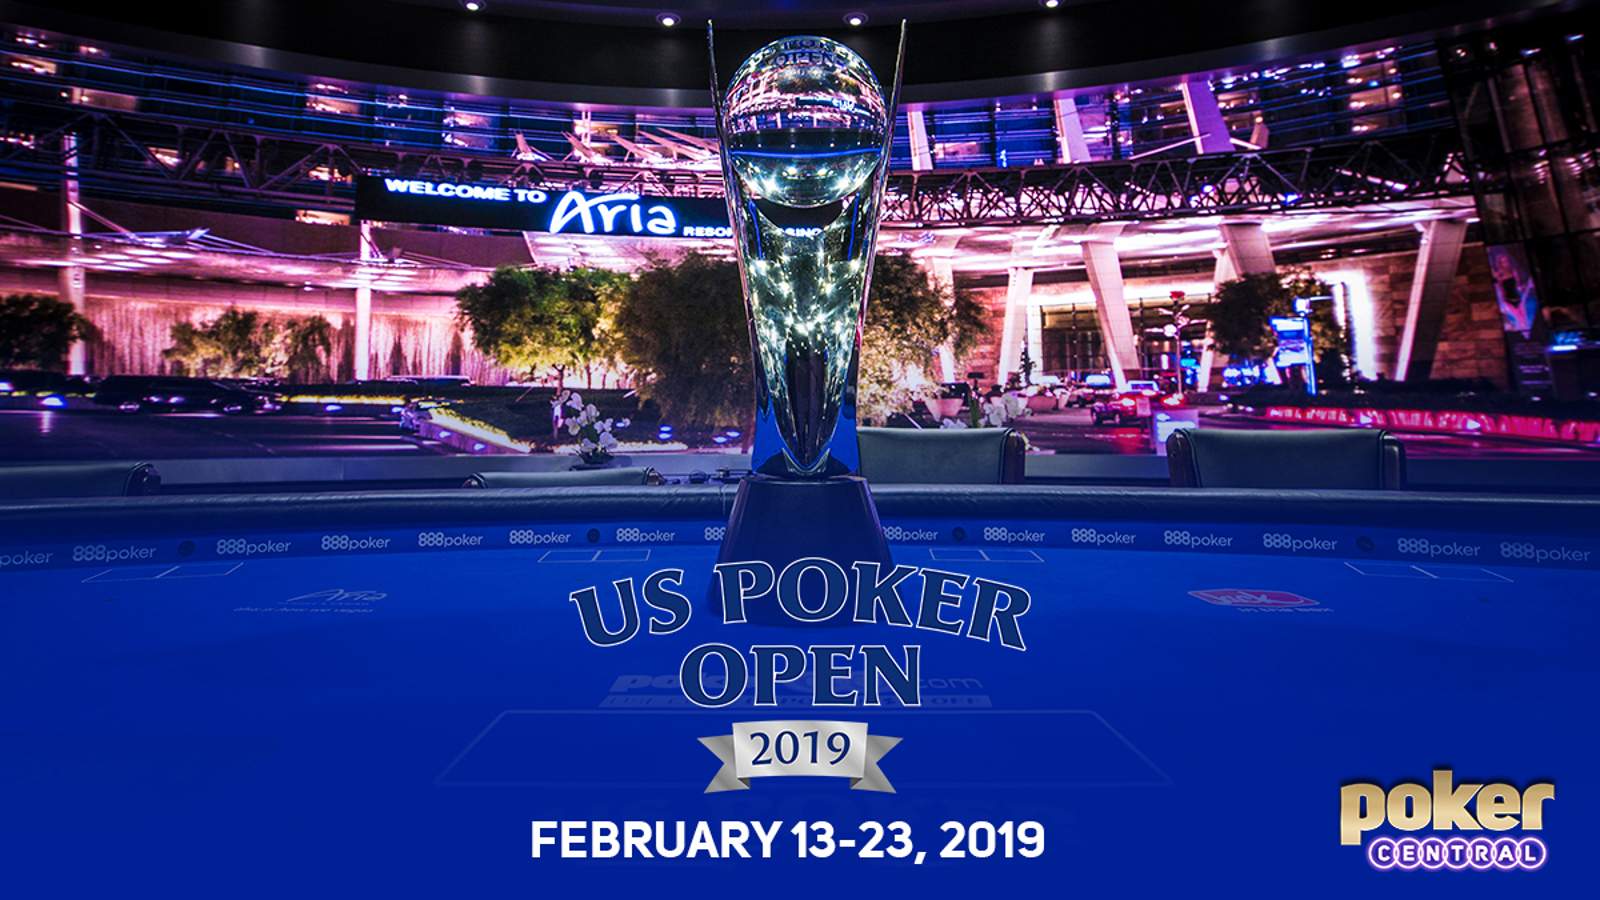 U.S. Poker Open 2019 Dates and Added Cash Prize Announced